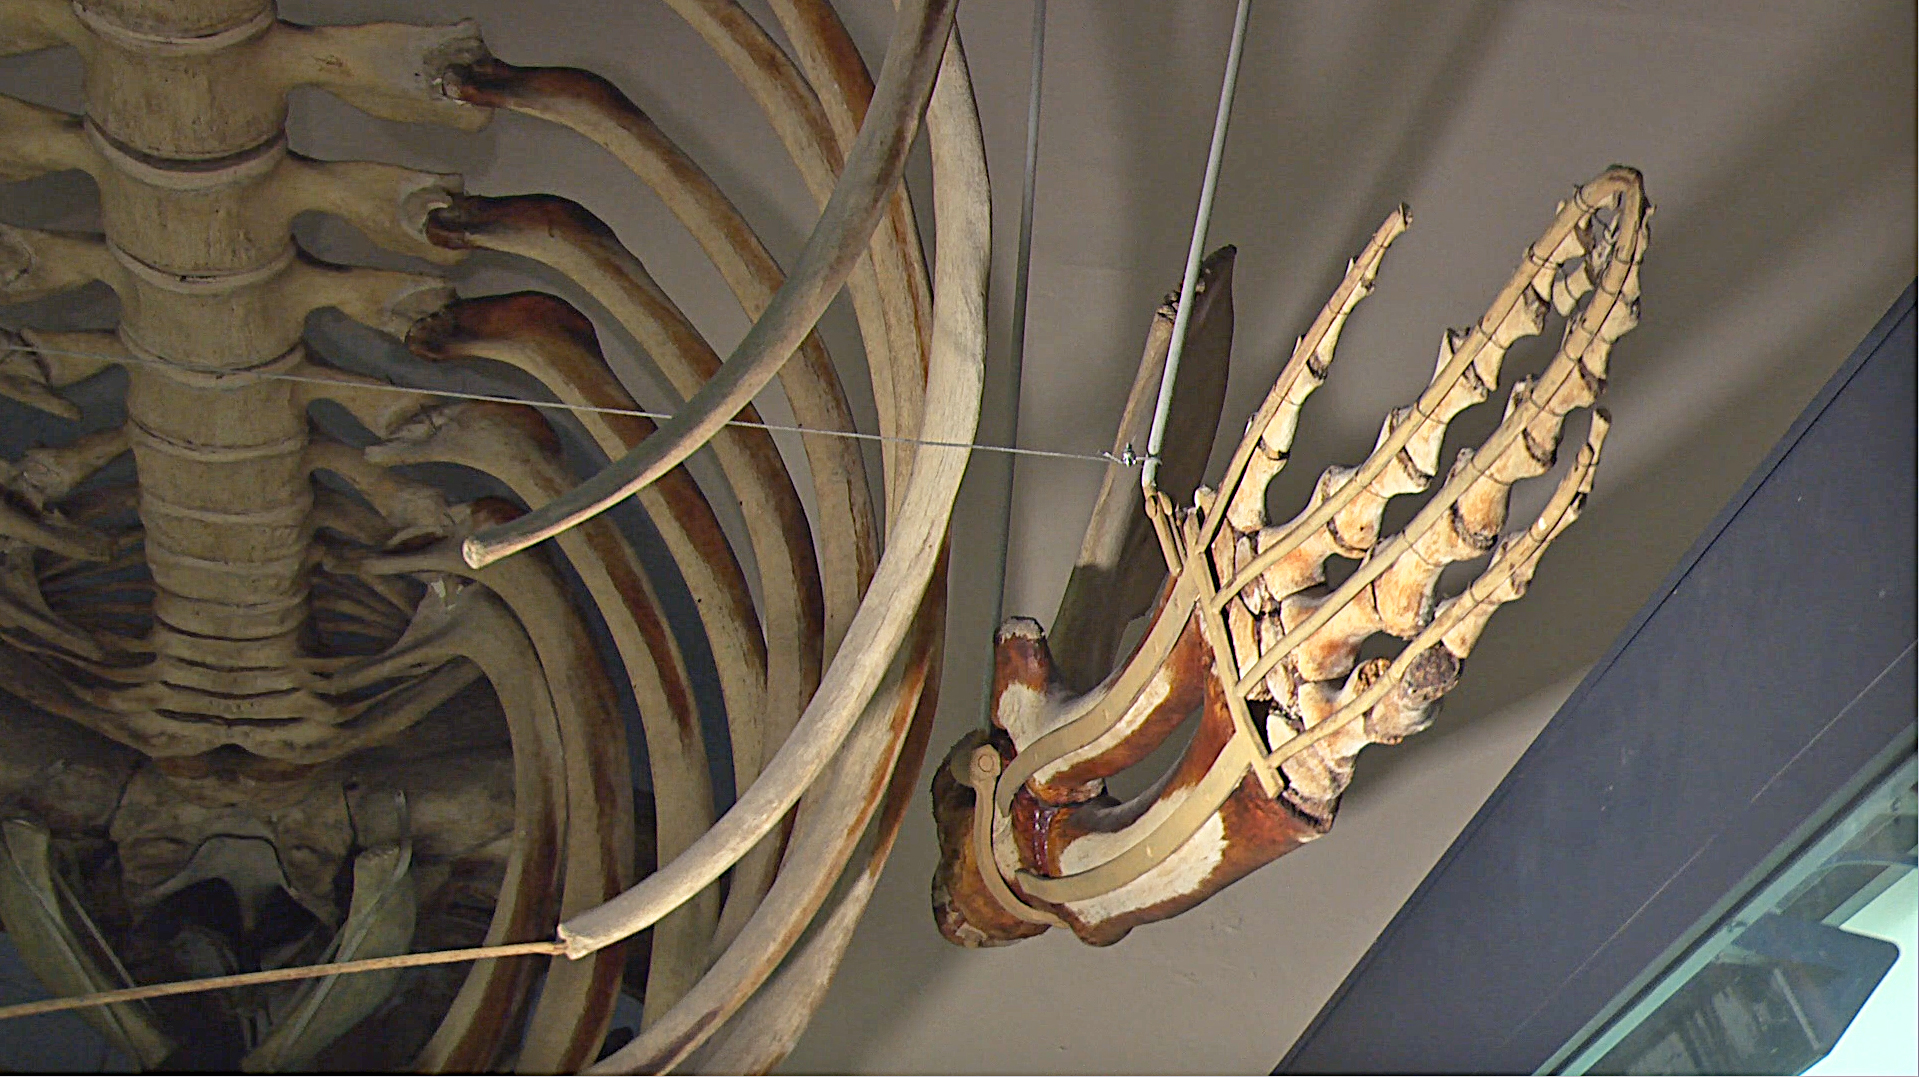 The Fin Whale skeleton